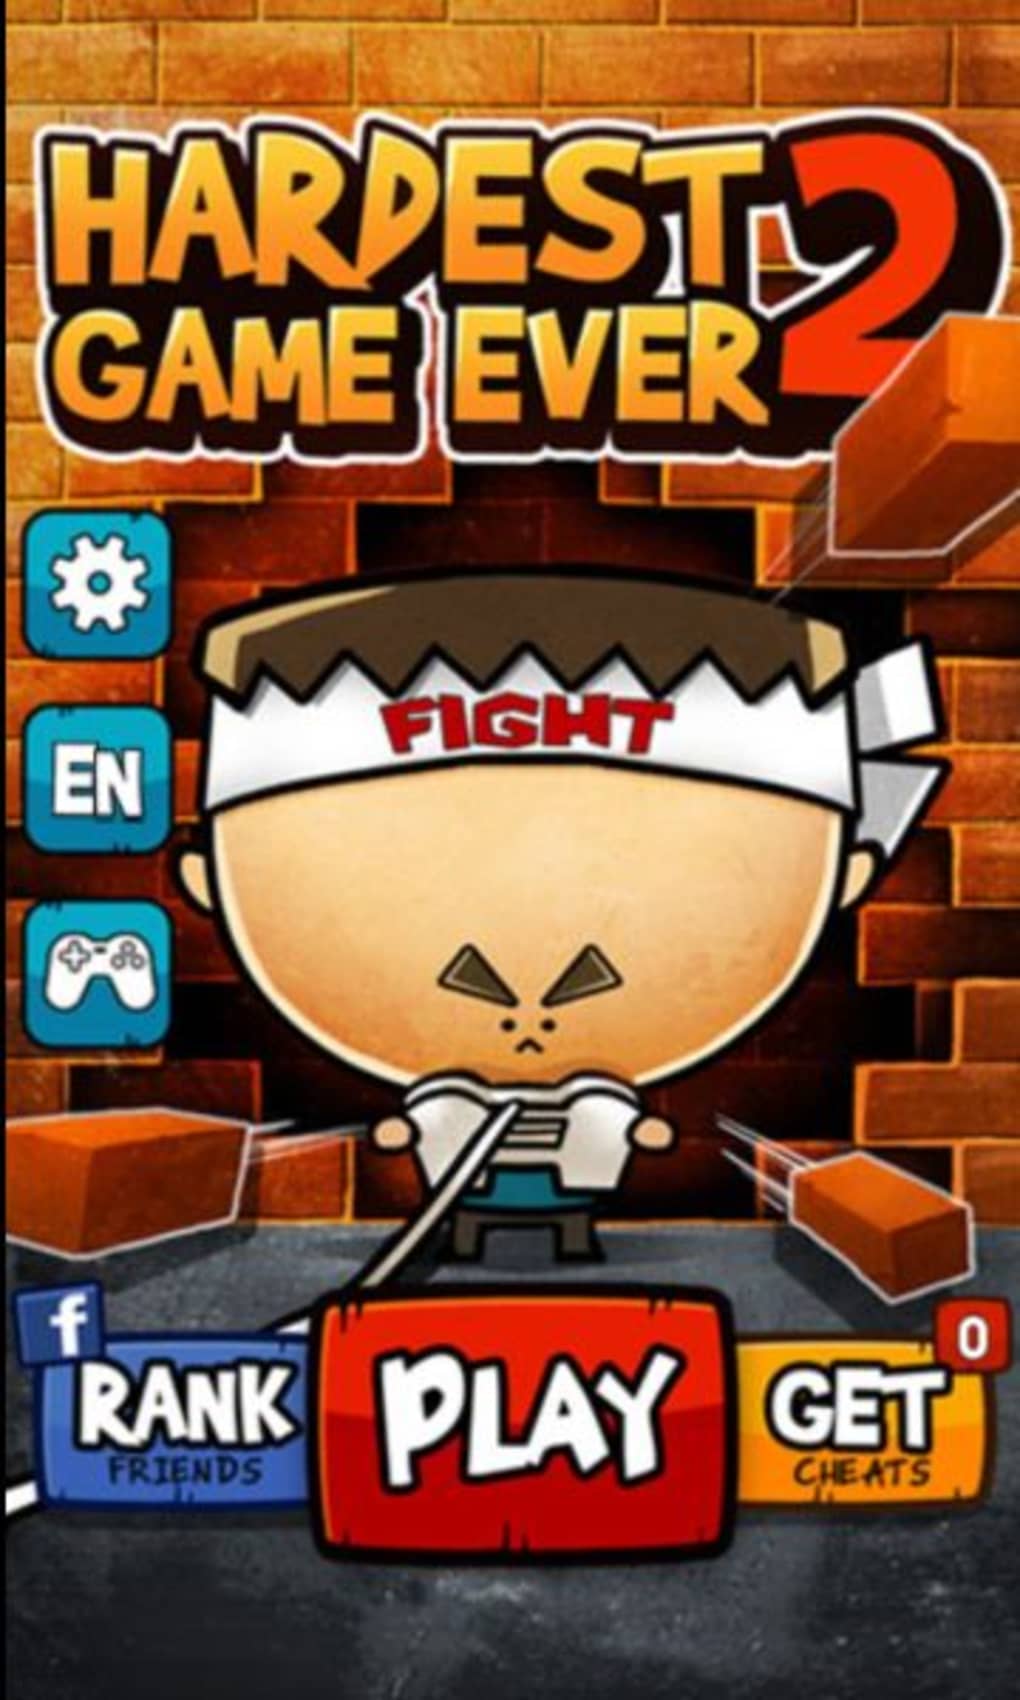 World's Hardest Game Apk Download for Android- Latest version 2.1